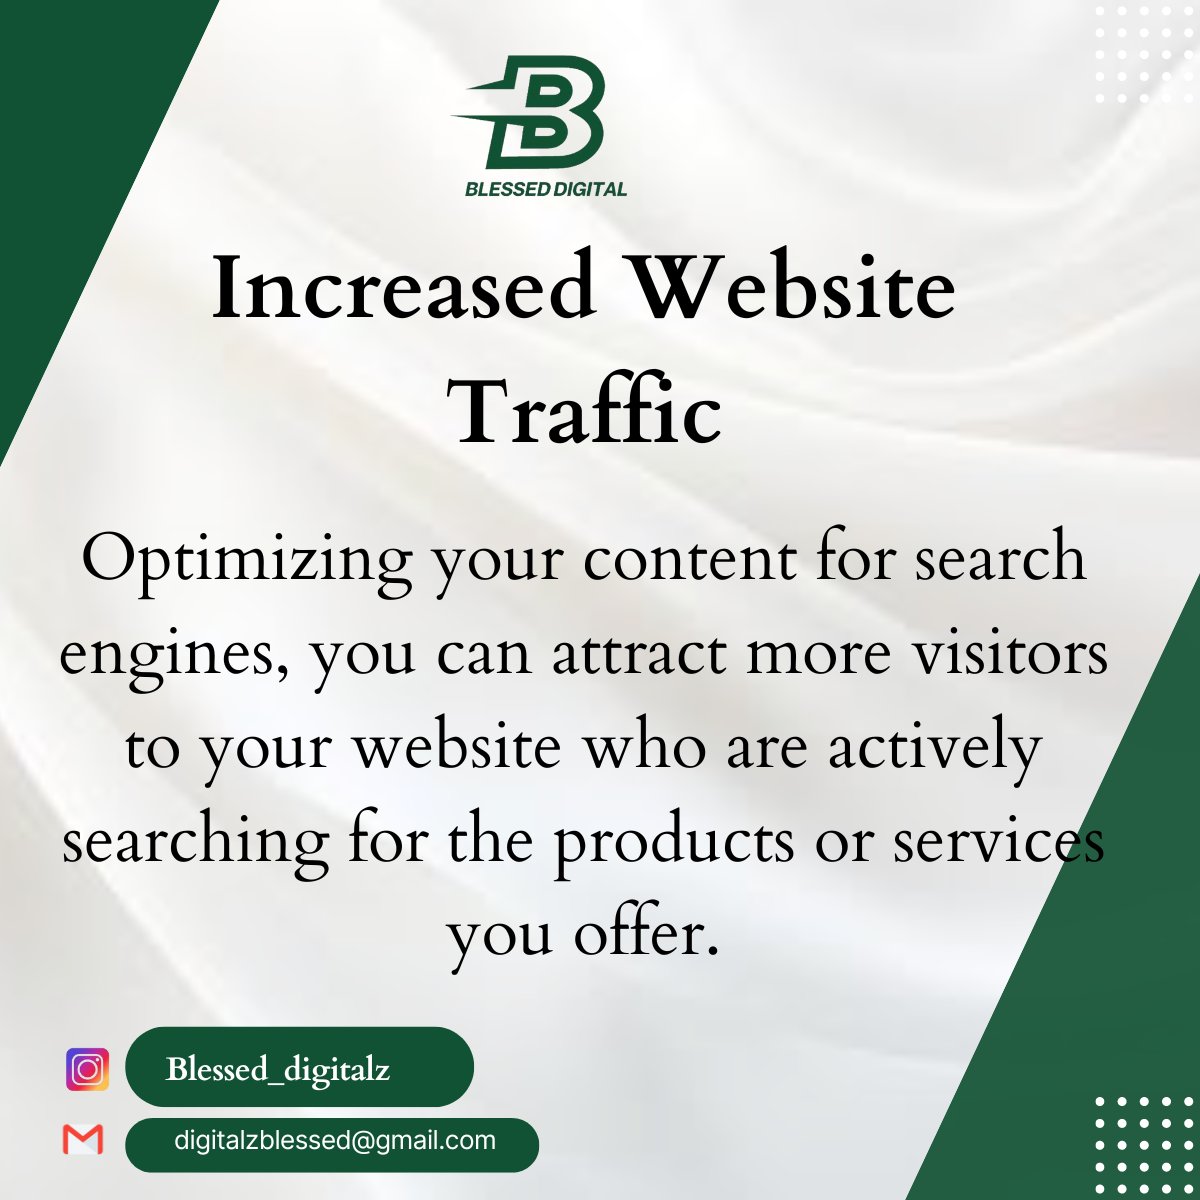 Are you looking to improve your website's search engine ranking and drive more organic traffic? SEO (Search Engine Optimization) is the key to achieving these goals. 
#SEOcontent #SearchEngineOptimization #DigitalMarketing #ContentMarketing #OnlineVisibility #accessbank